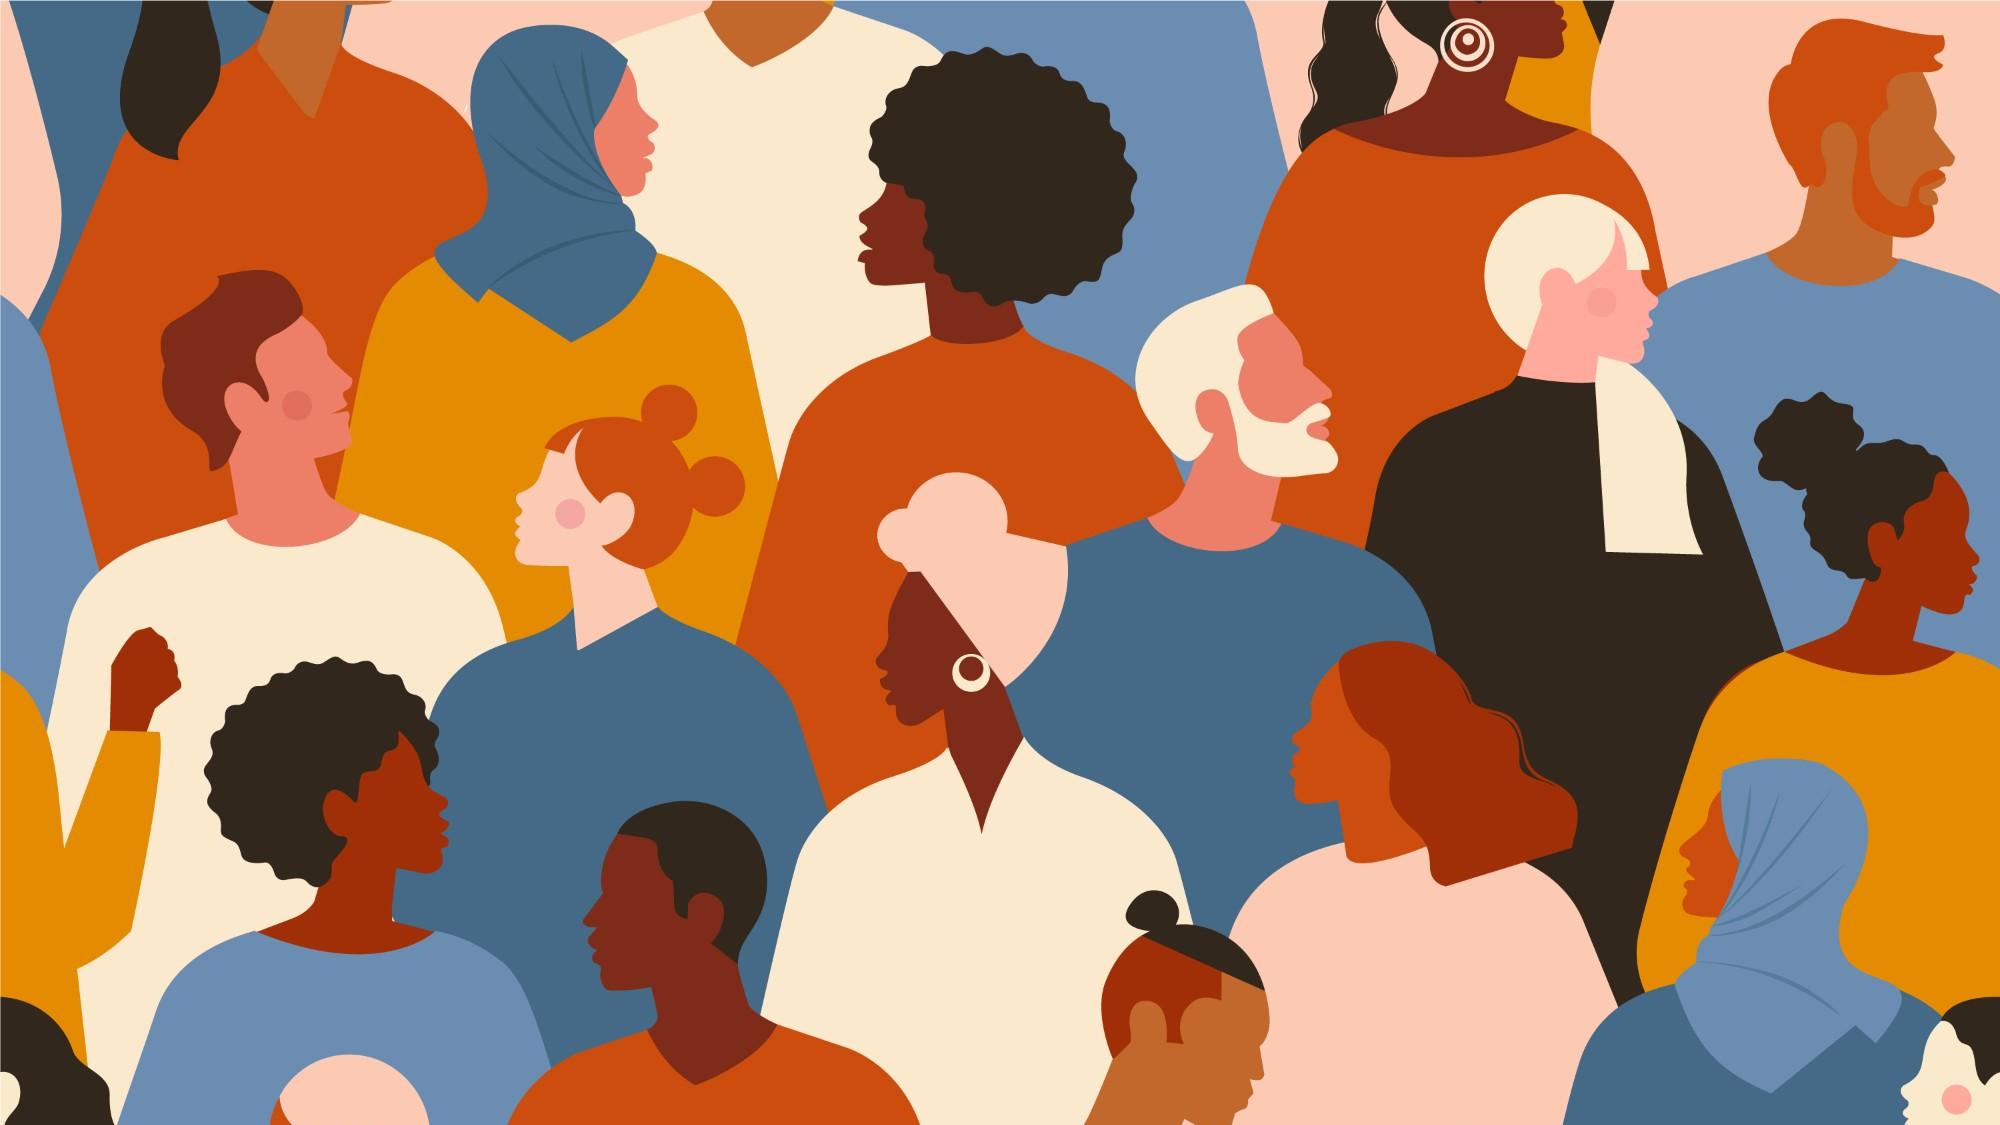 An illustration of people from diverse racial backgrounds. Image by Lyubov Ivanova / Getty Images